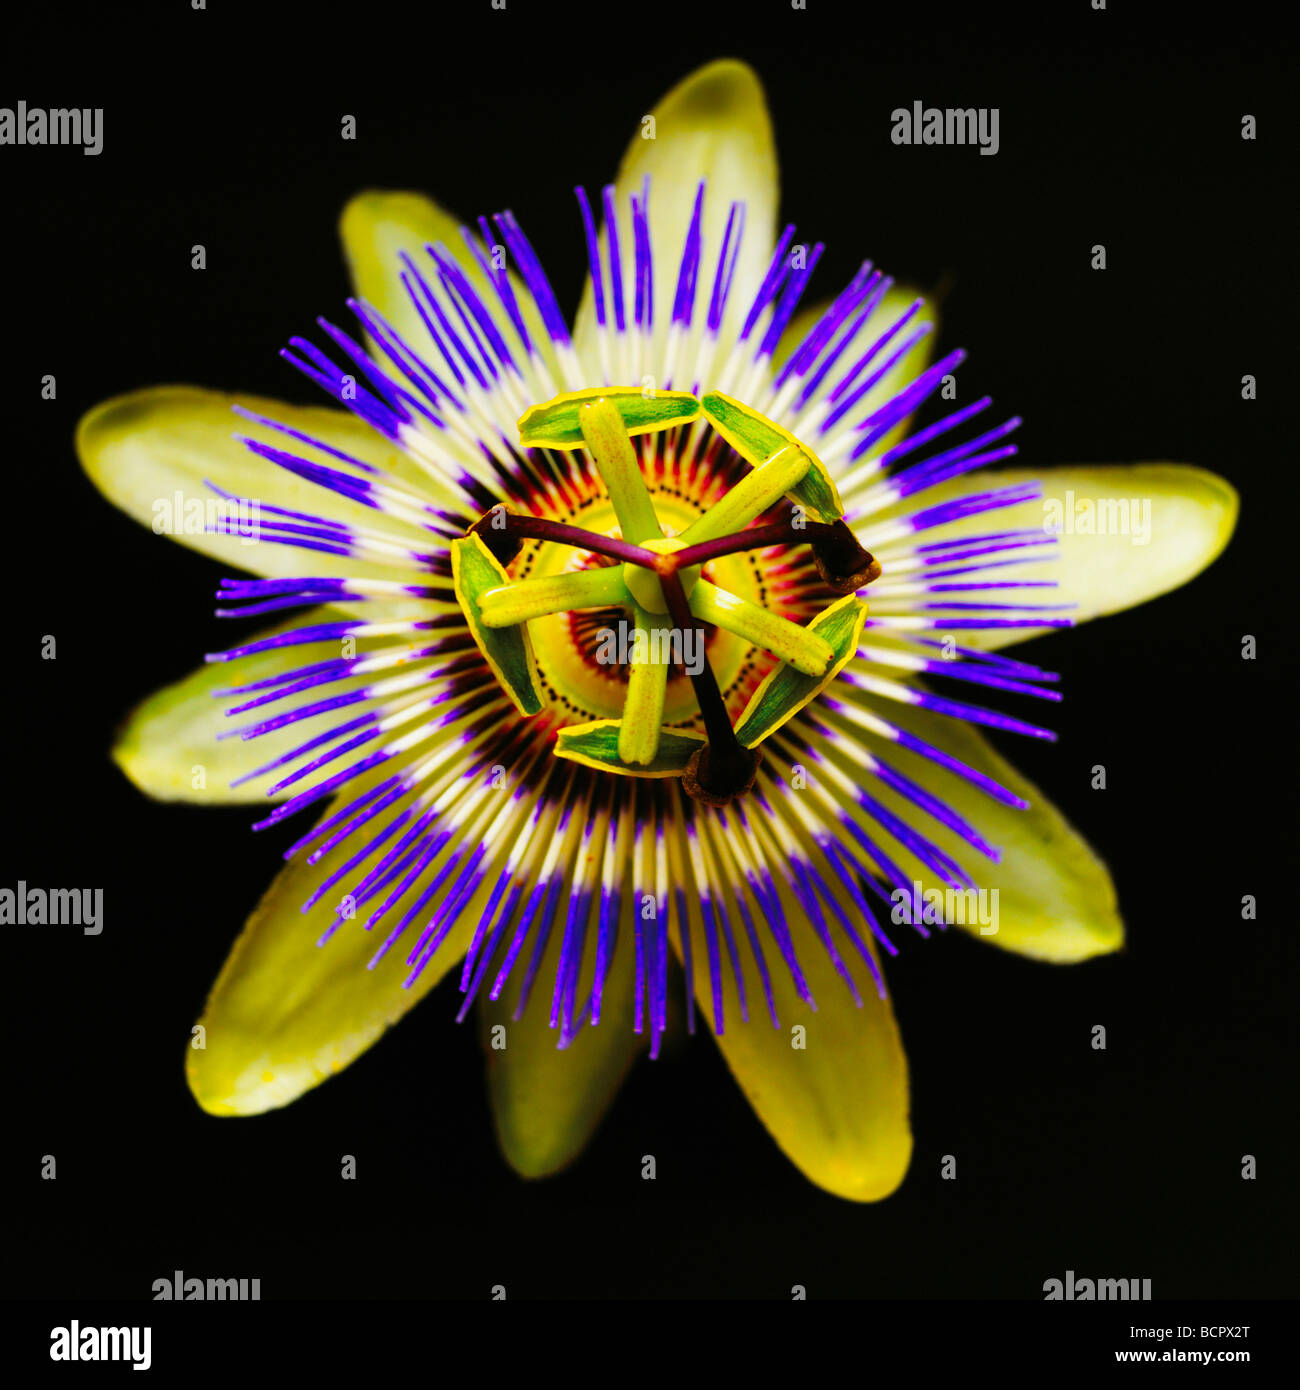 Passiflora, Passion flower, Top view of a yellow and purple symmetric flower against a black background, Stock Photo